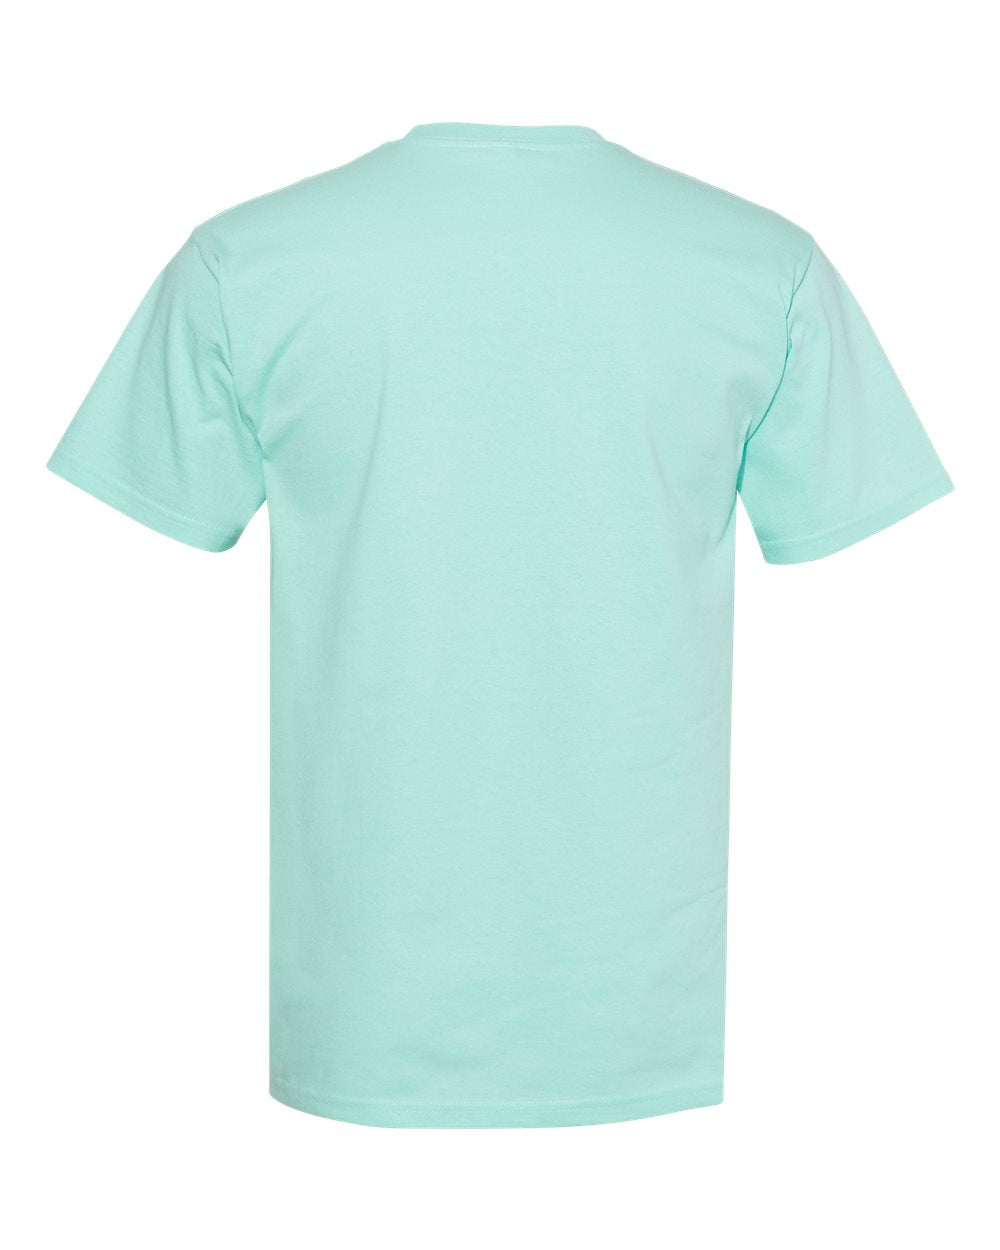 American Apparel Midweight Cotton Unisex Tee 1701 #color_Celadon